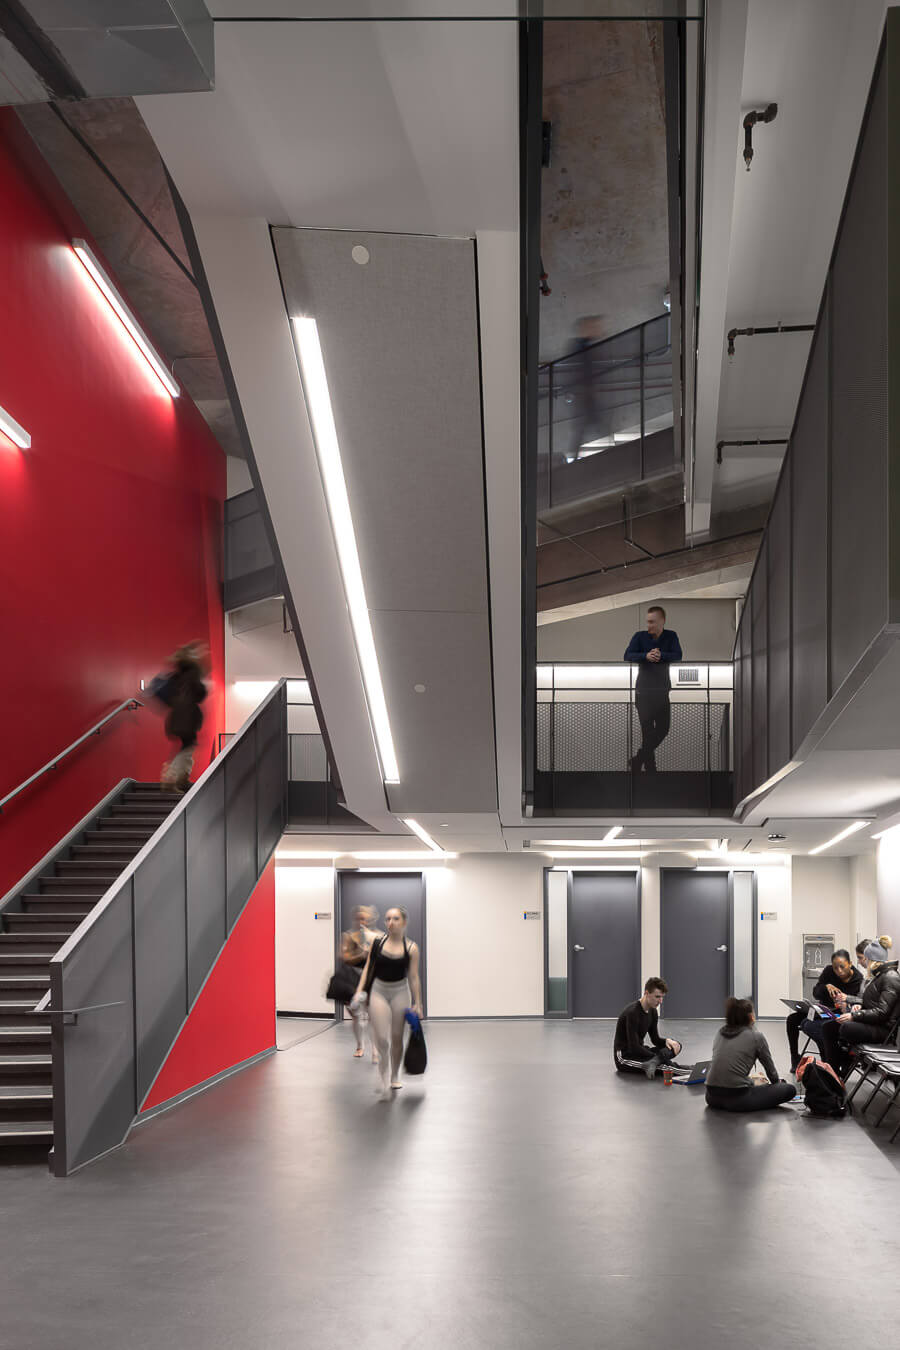 Hallway of the School of Performance at Ryerson University. A double-height red wall juxtaposes against warm, light and dark greys on the polished concrete floors and inter-secting stairwells. The space looks up from the lower level to the mezzanine and the open stairs going to the upper levels. Strips of warm, bright lighting illuminate the space as dancers prepare for classes.